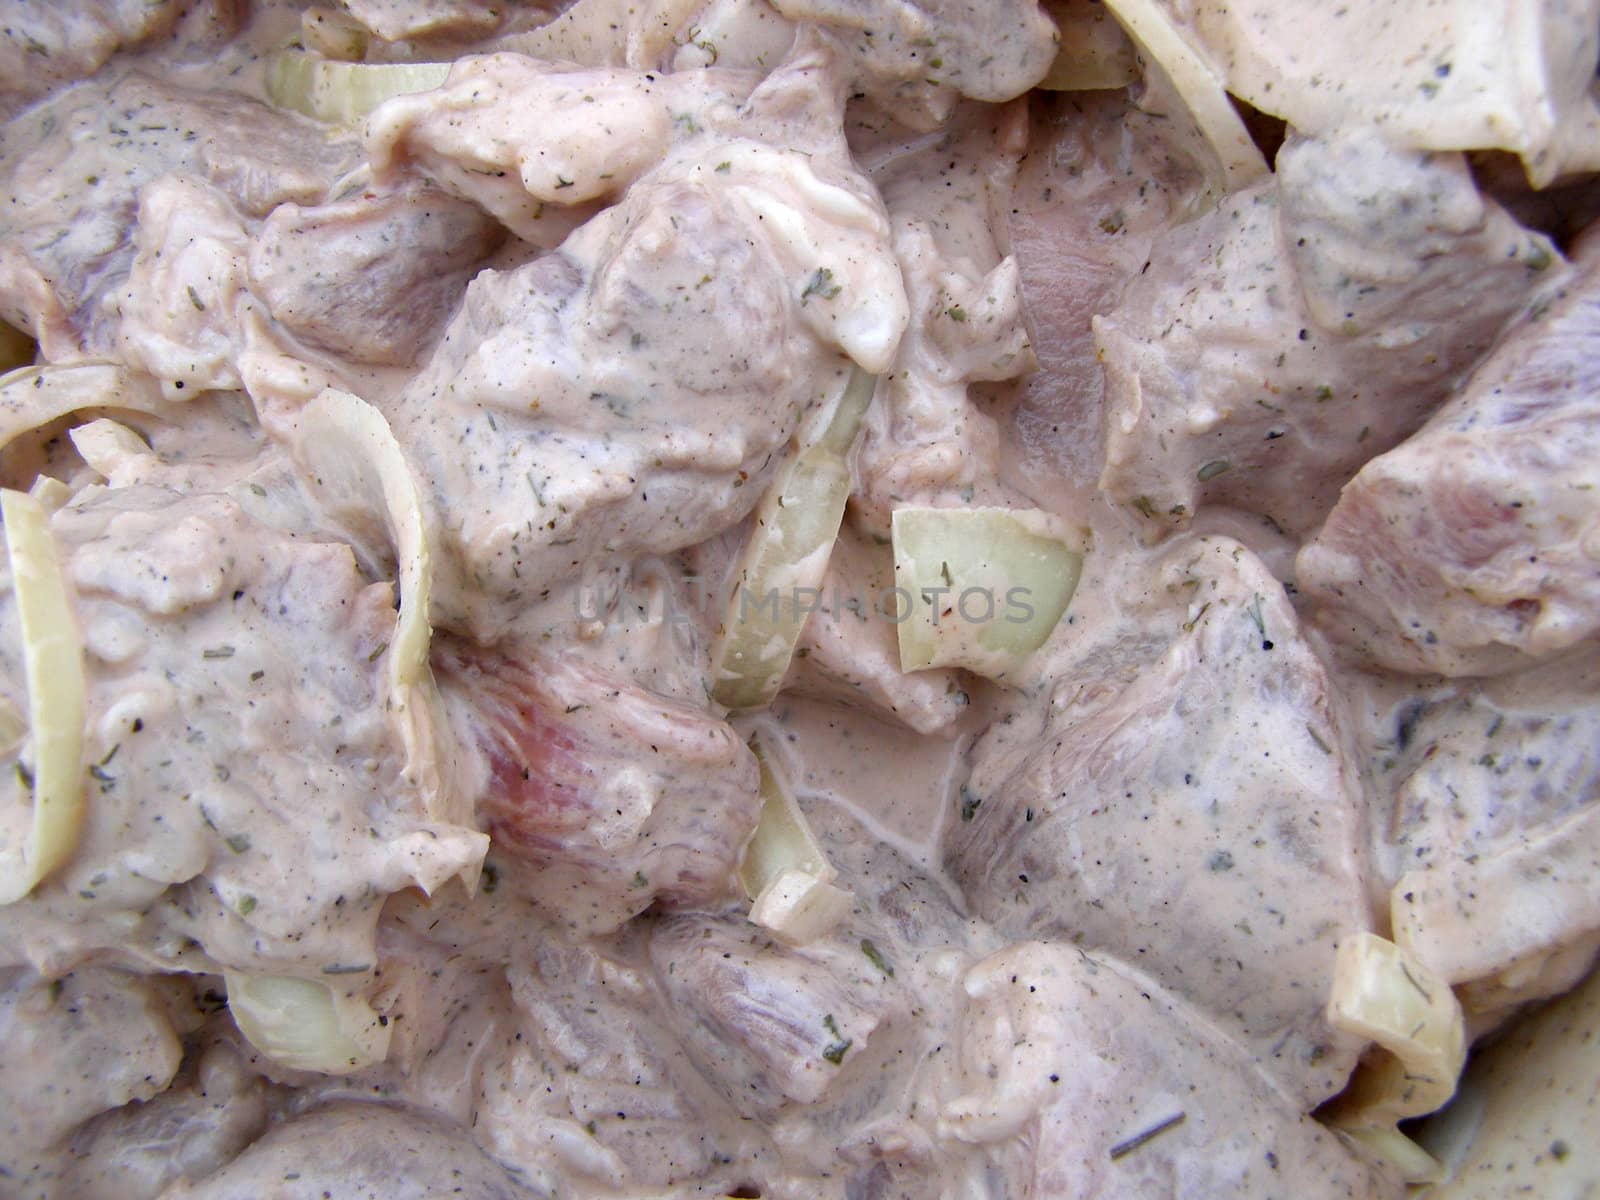 Damp meat is wet in the marinade with the mayonnaise for the preparation of shish kebab.